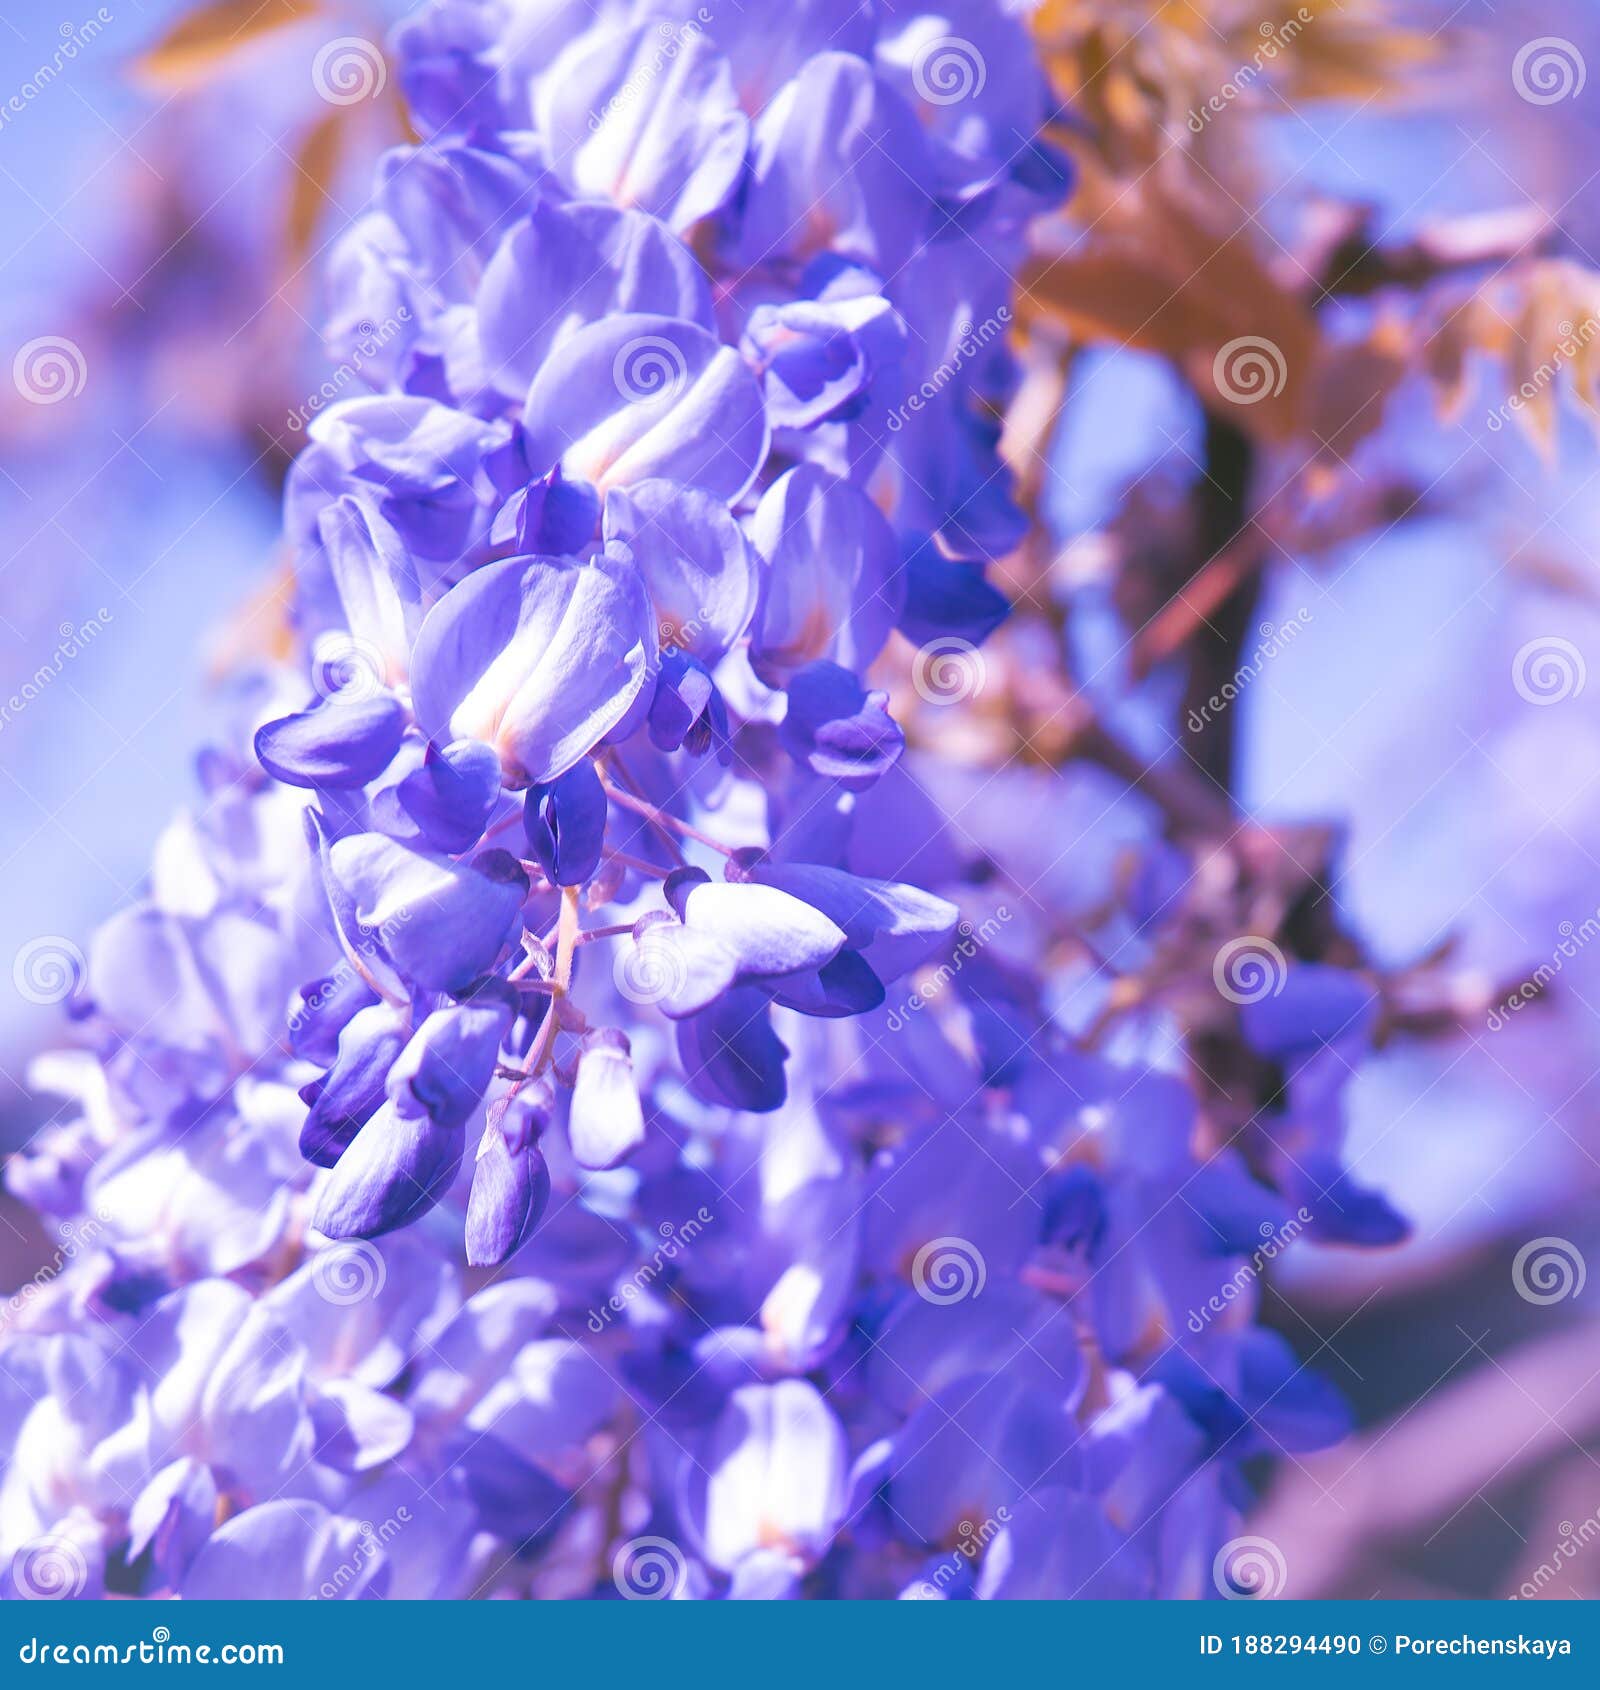 Nature Aesthetics Wallpaper Blooming Blue Flowers Stock Photo Image Of Tree Wallpaper